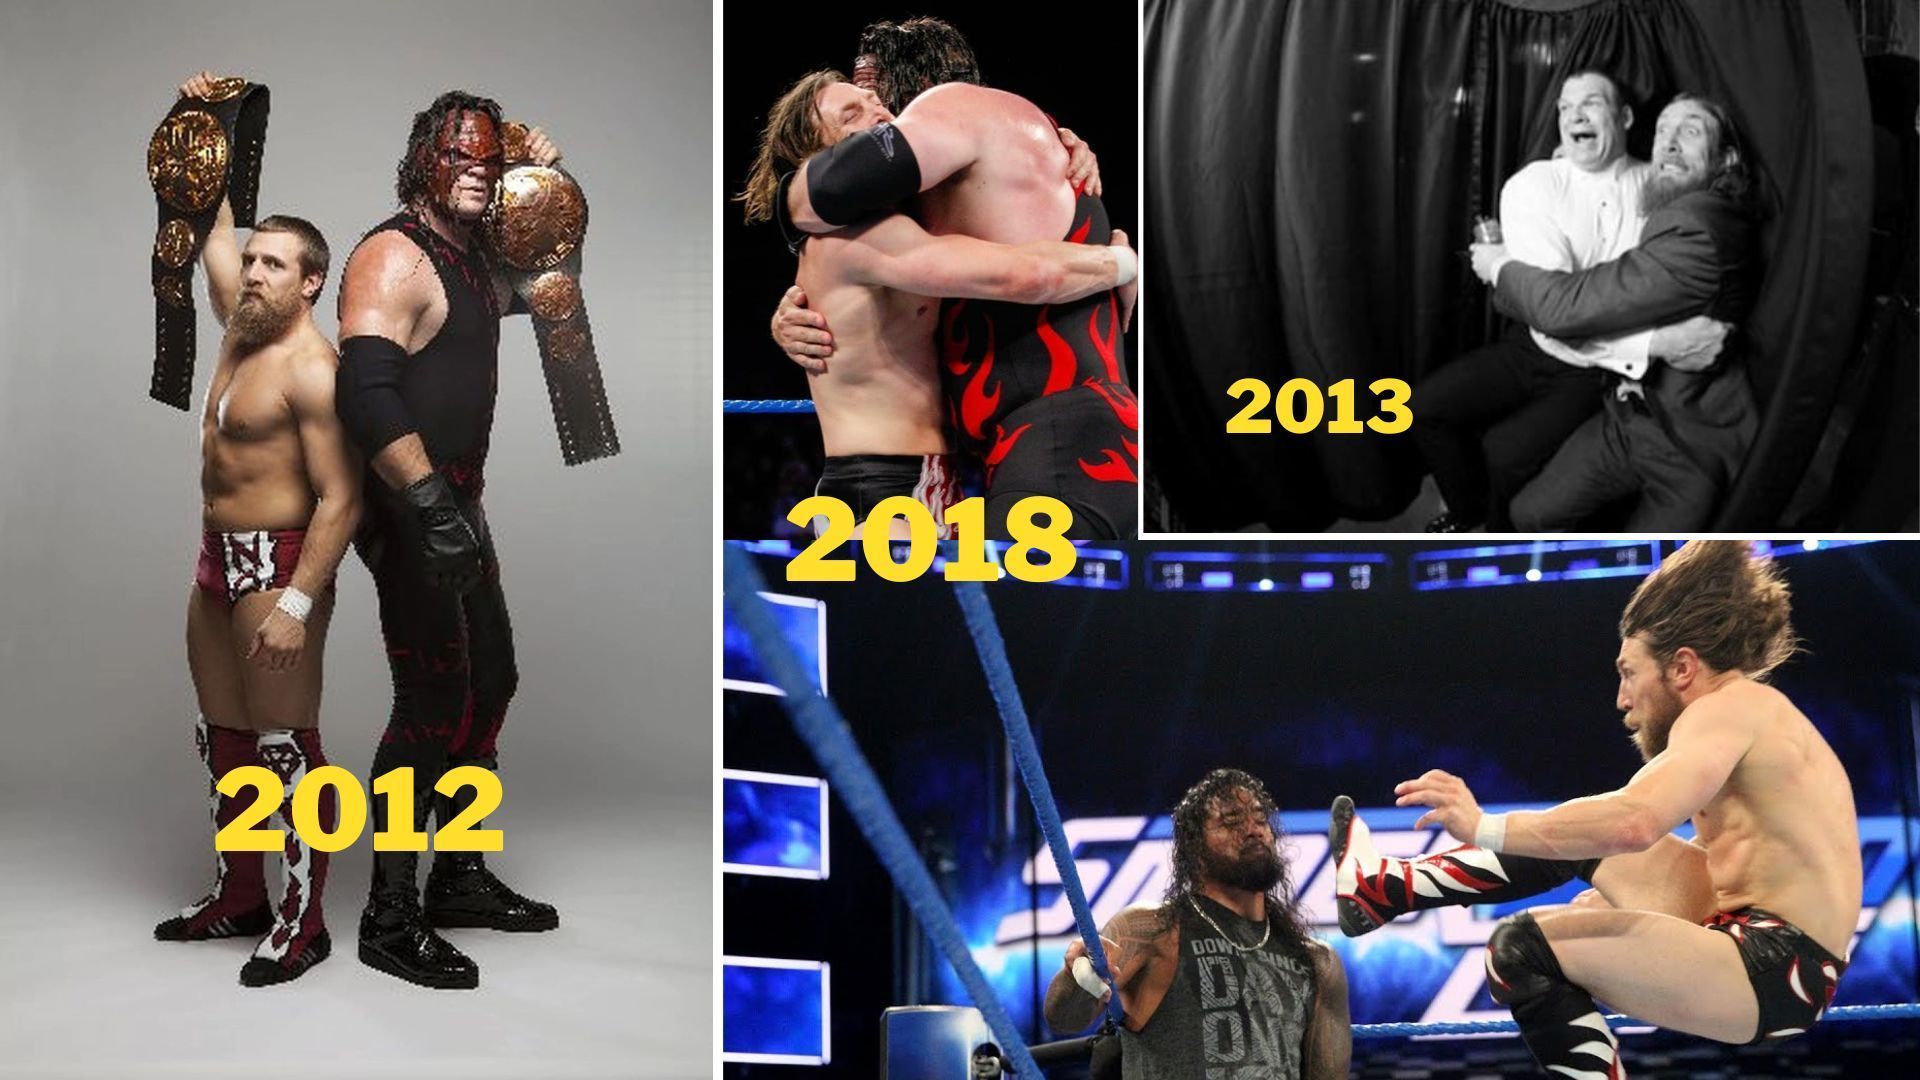 Daniel Bryan and Kane were together a solid odd-ball tag team in the early 2010s